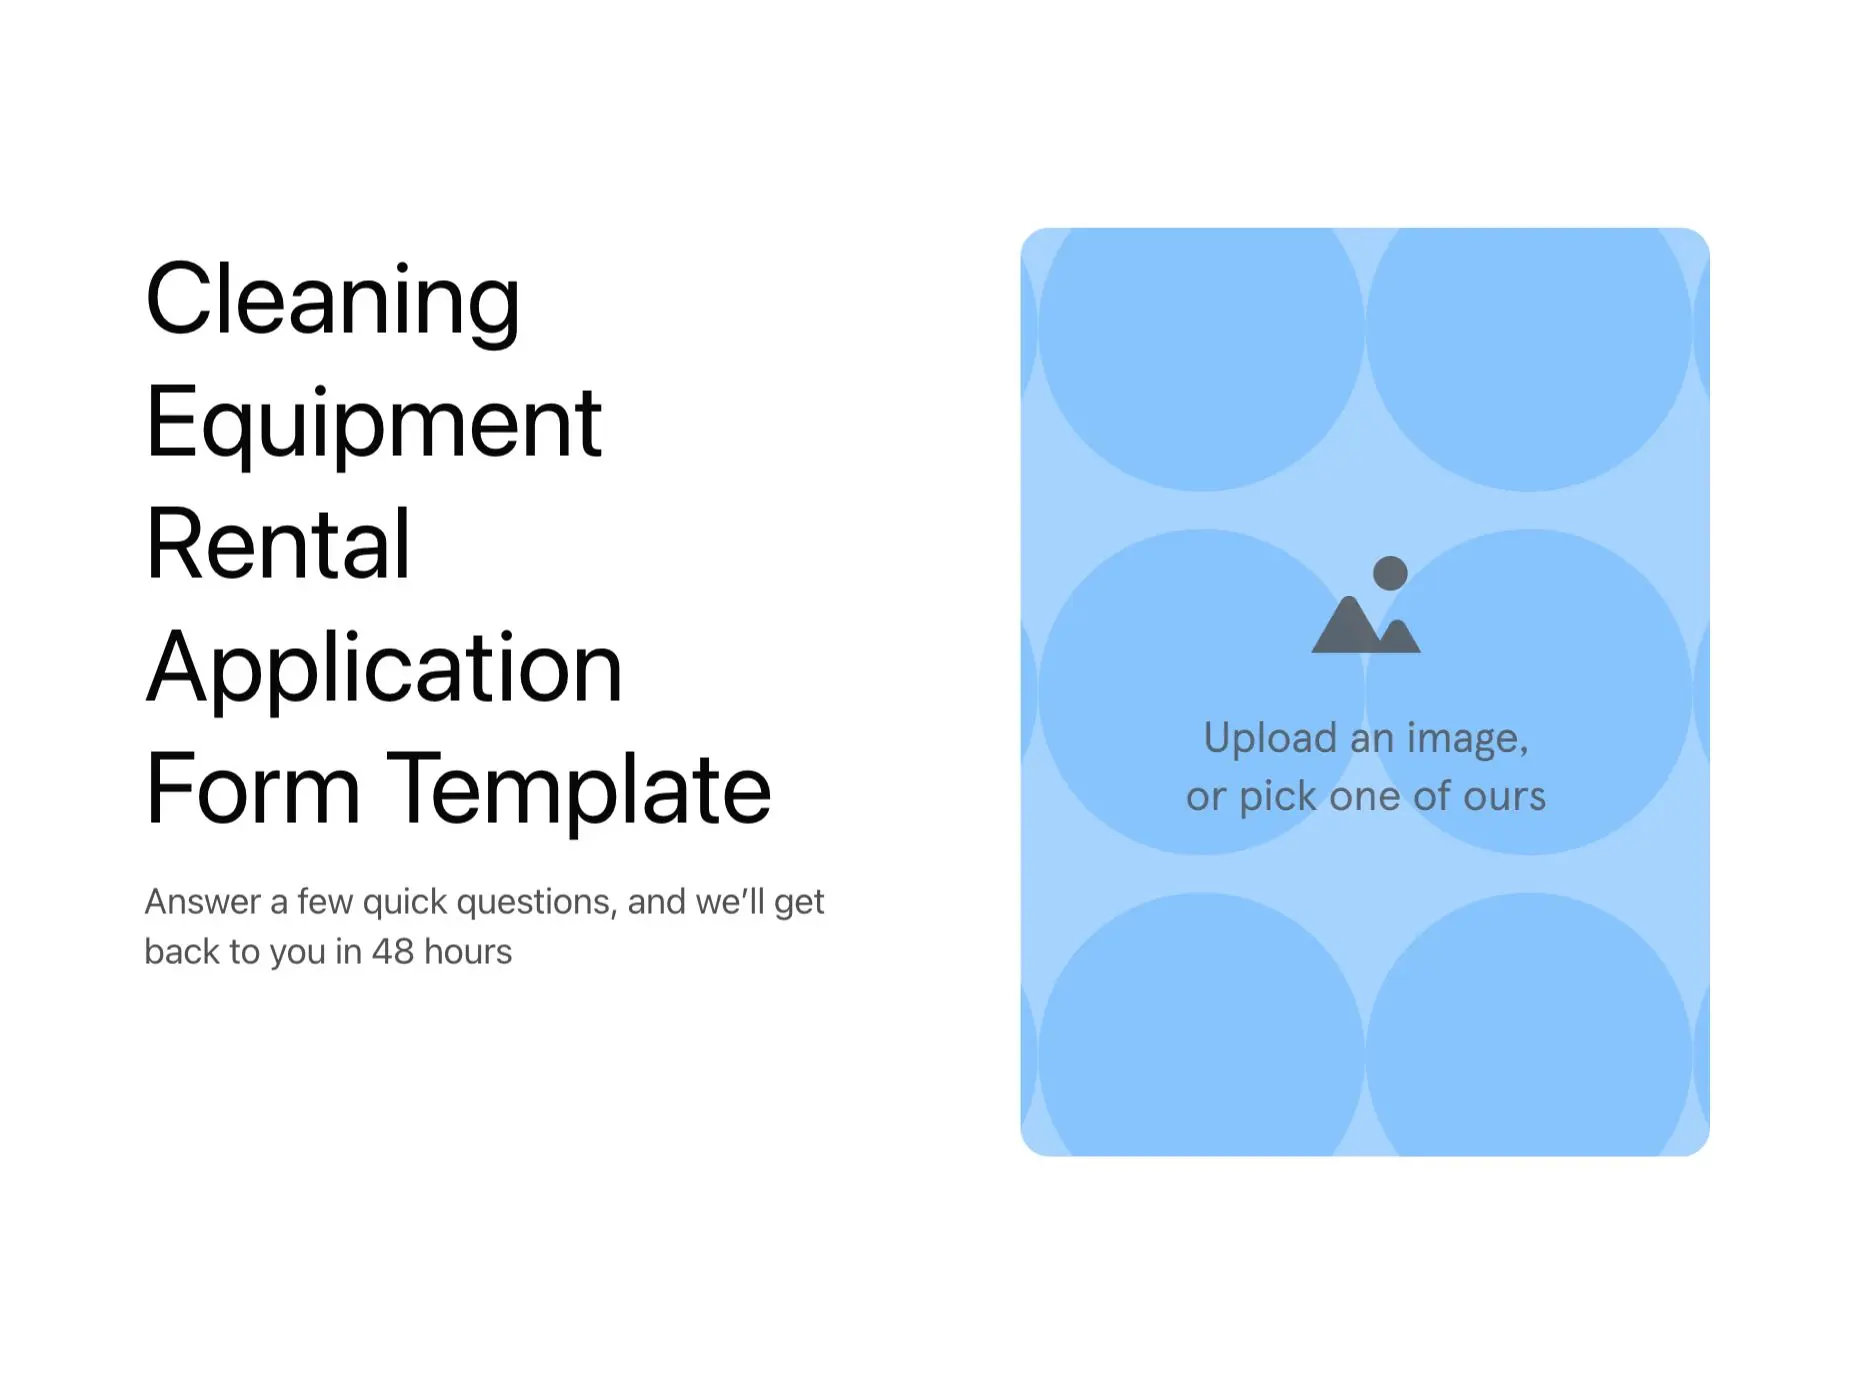 Cleaning Equipment Rental Application Form Template Hero